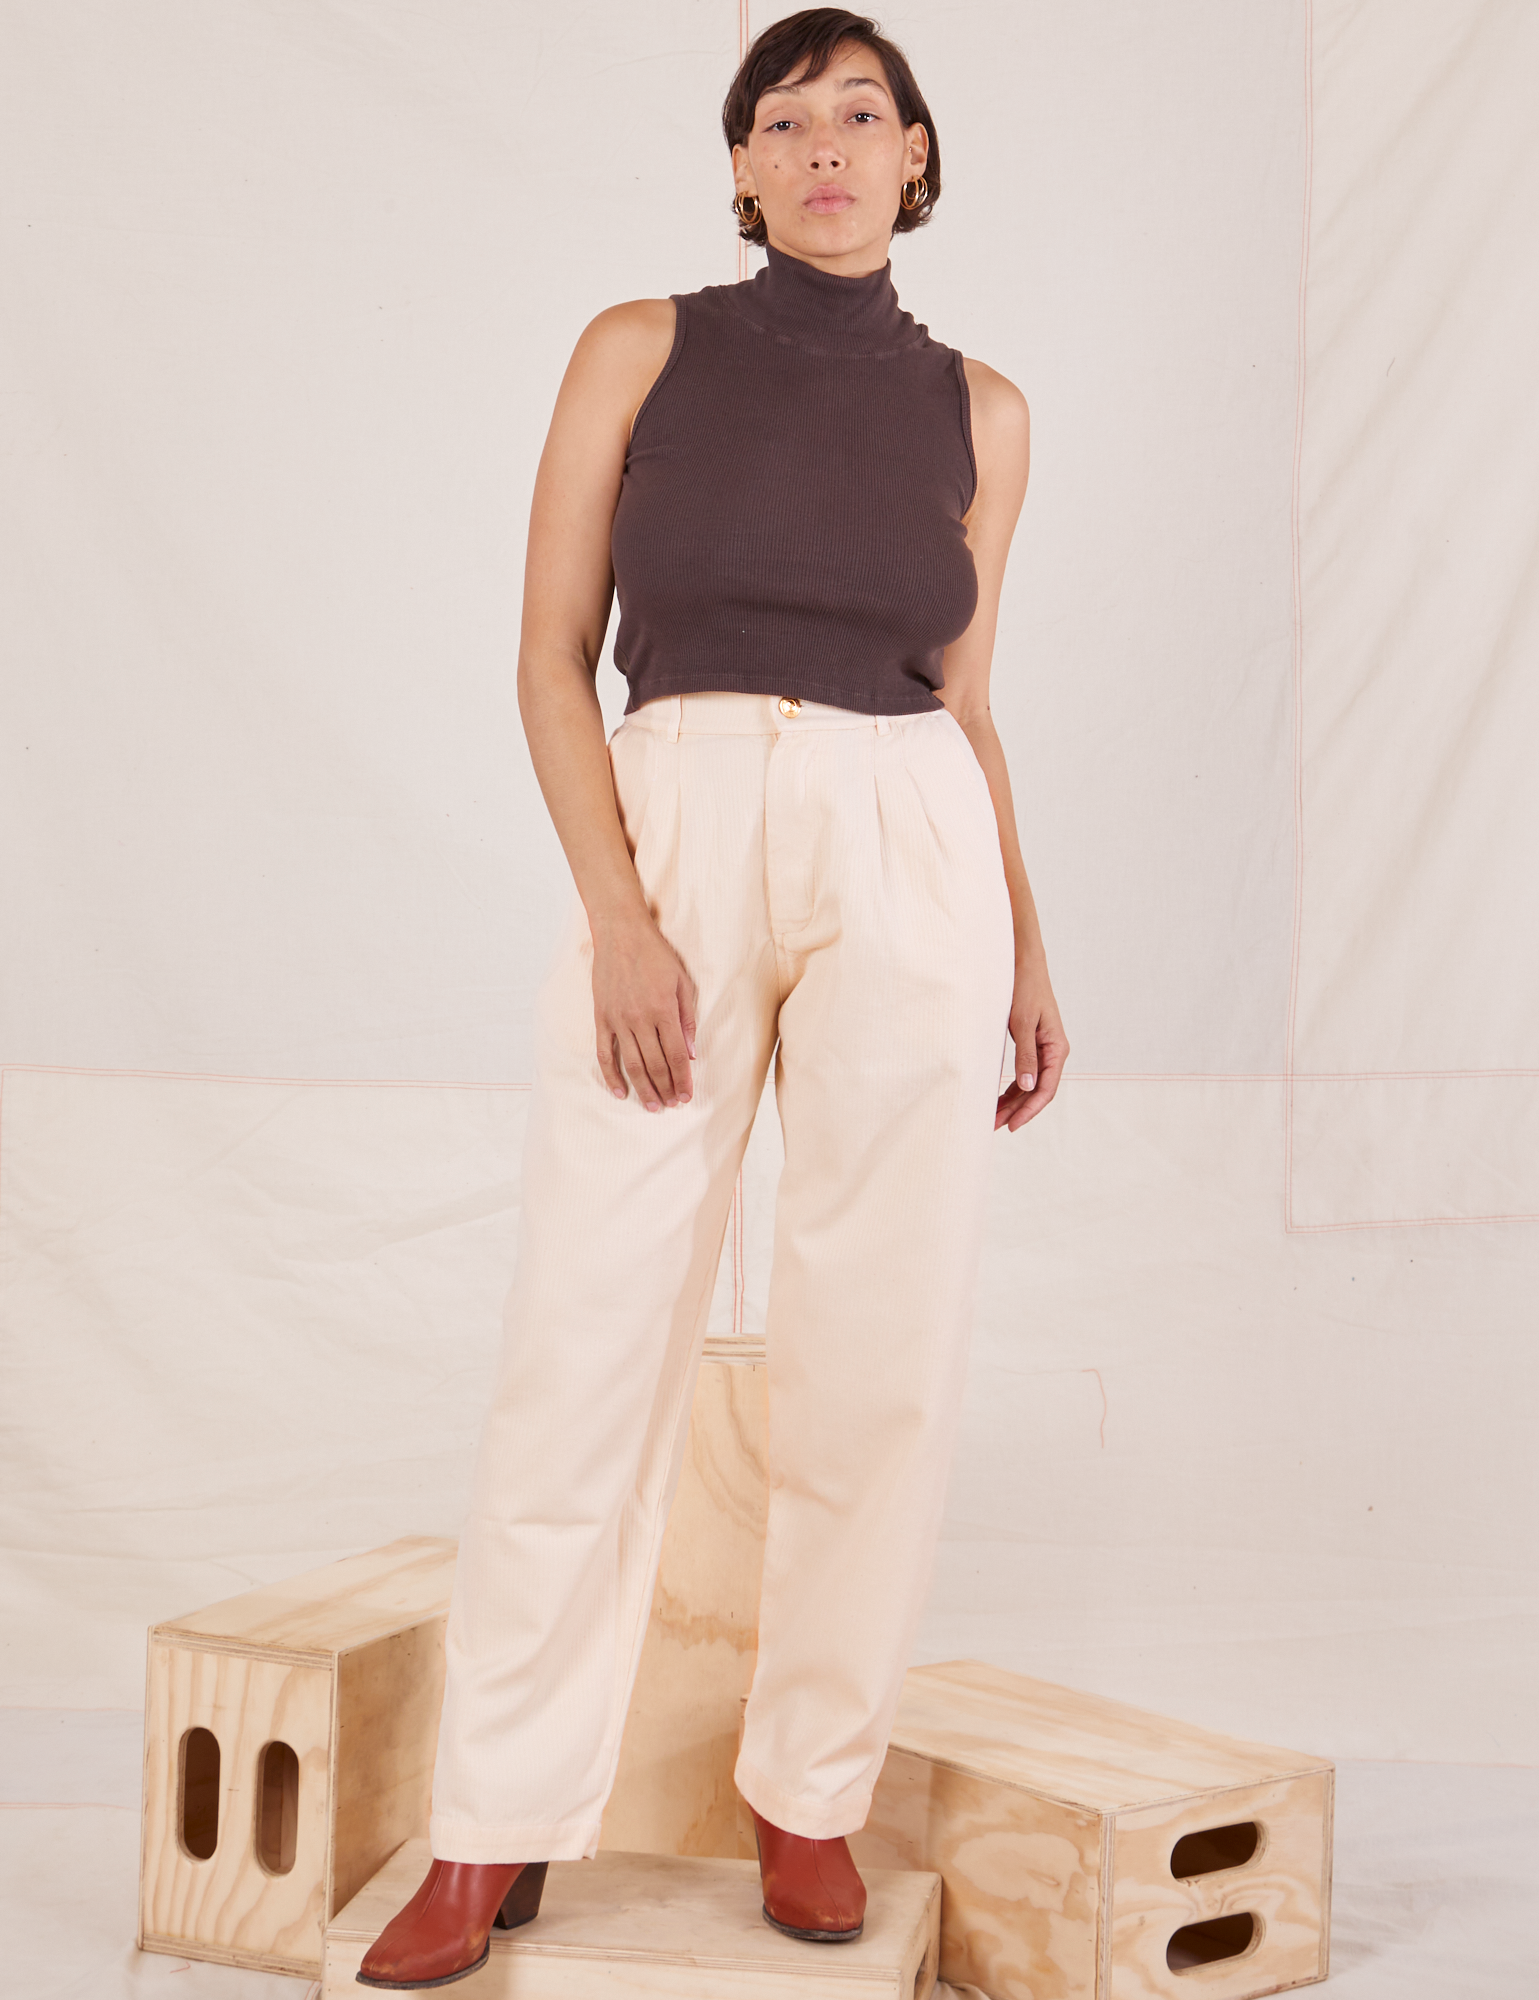 Tiara is 5&#39;4&quot; and wearing S Heritage Trousers in Vintage Off-White paired with the Sleeveless Turtleneck in espresso brown